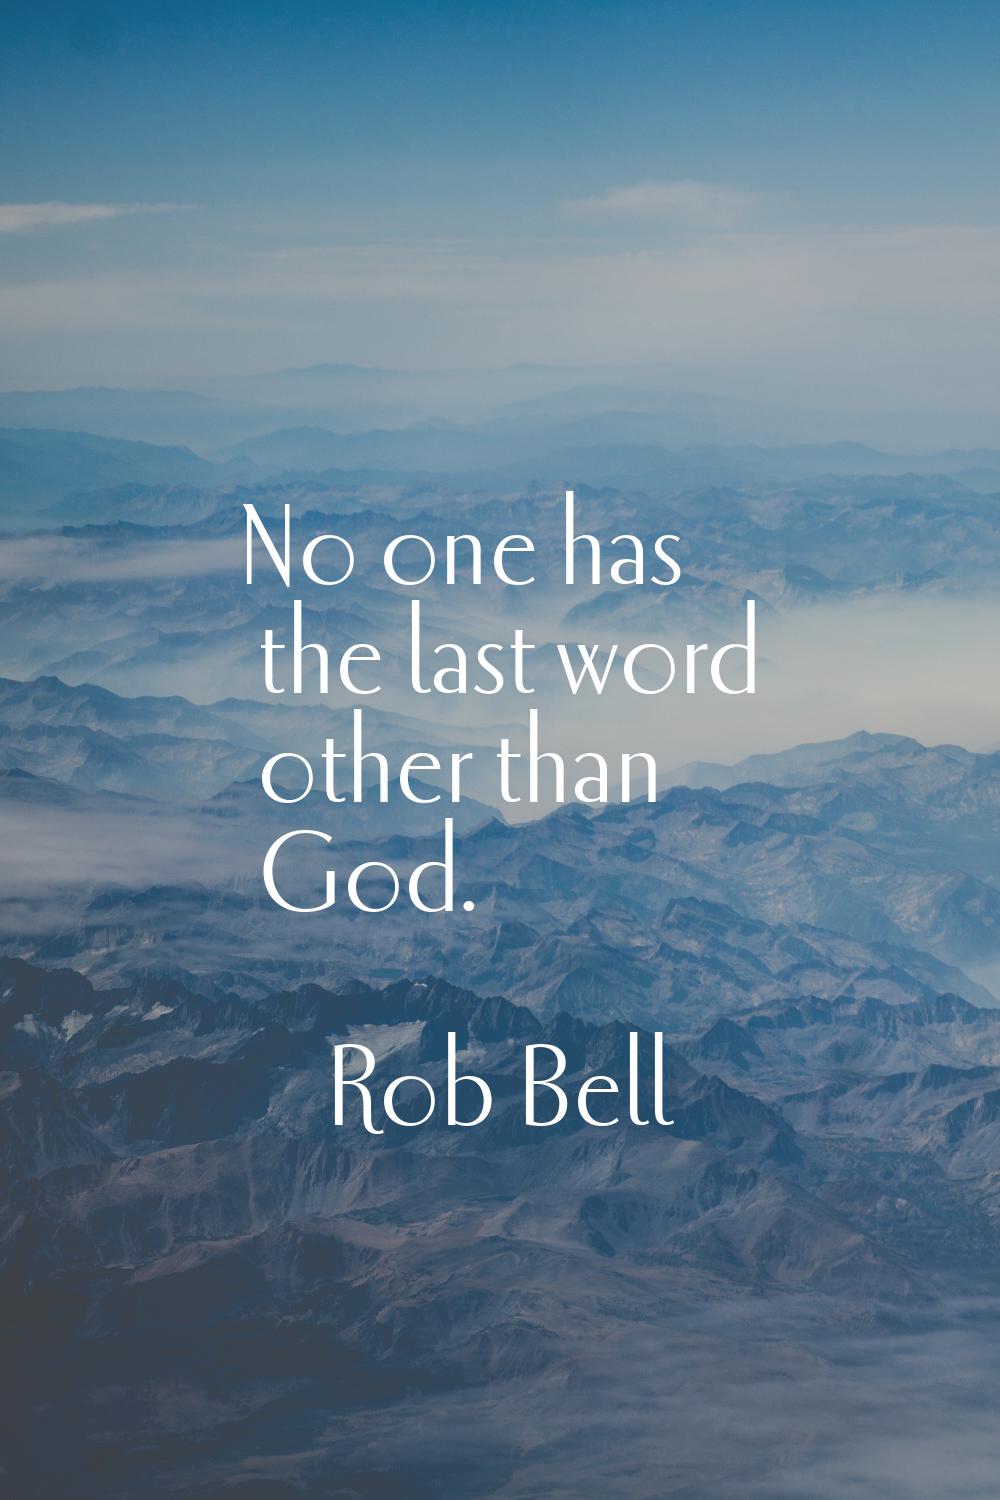 No one has the last word other than God.